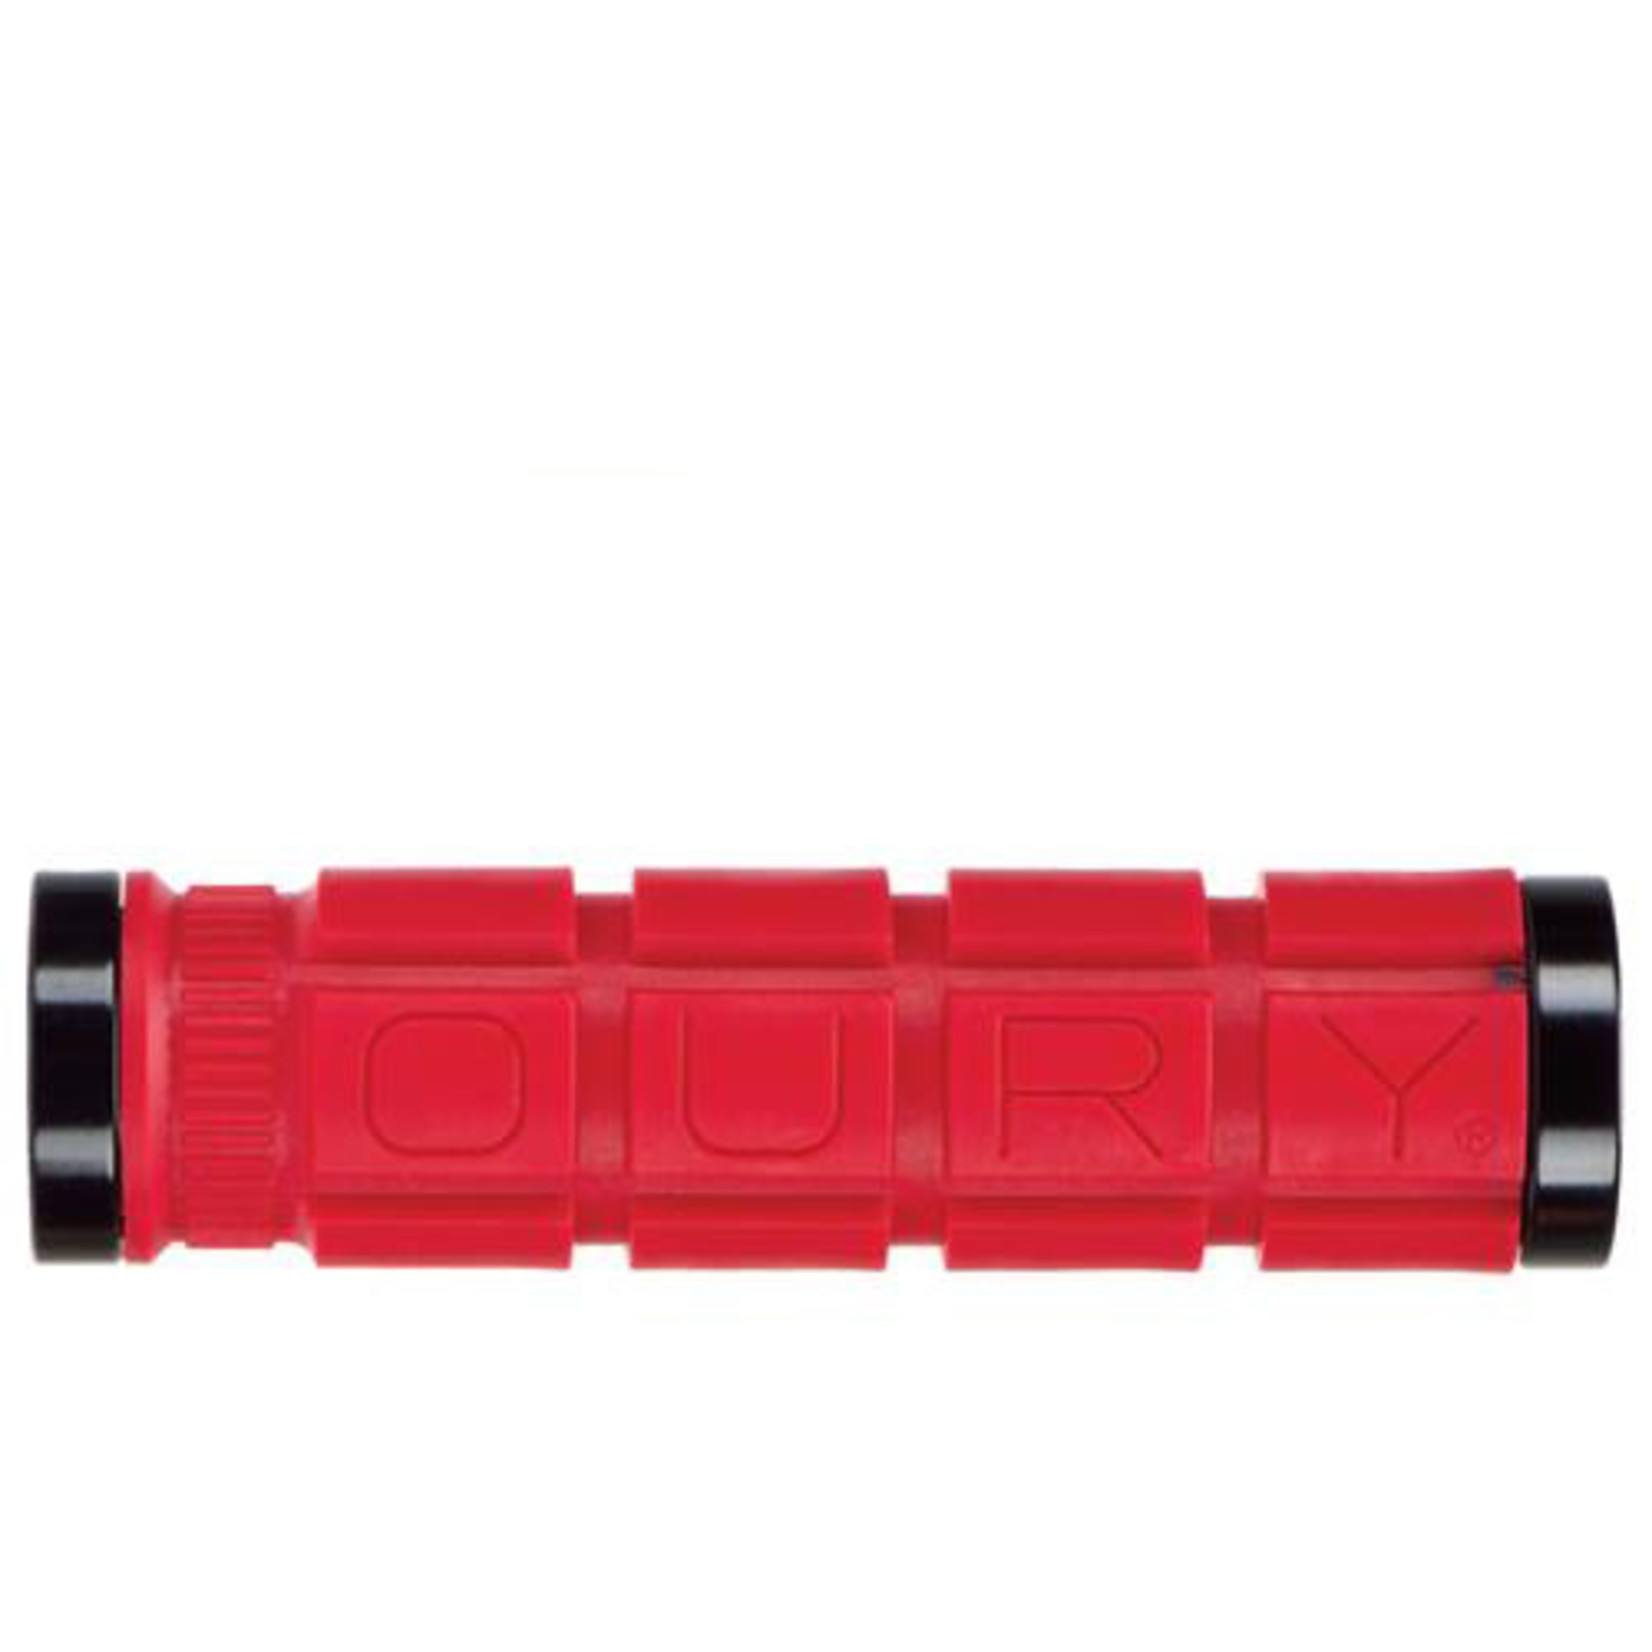 Oury Oury Handlebar Grips - Lock-On Dual - Bike Grip - Anti-Vibration - 130mm - Red